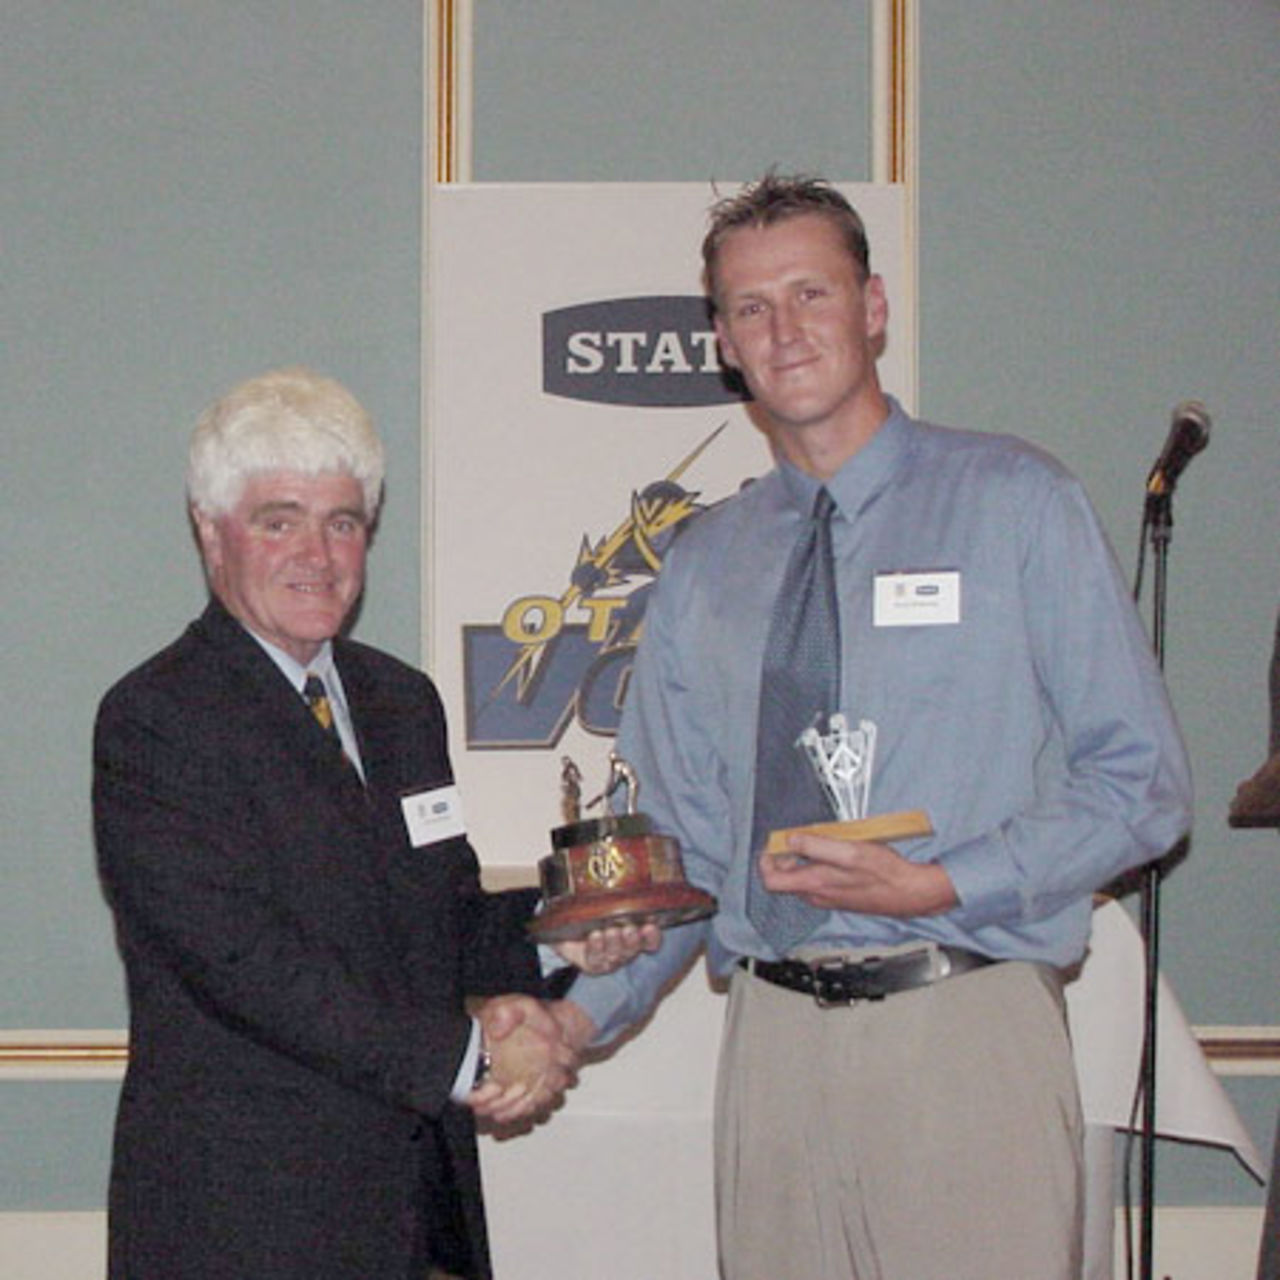 Kerry Walmsley (right) is presented the Peter Dick Trophy for the 2001/02 Otago cricketer of the year by Otago Cricket Association president Warren Shirley. 9 April 2002.